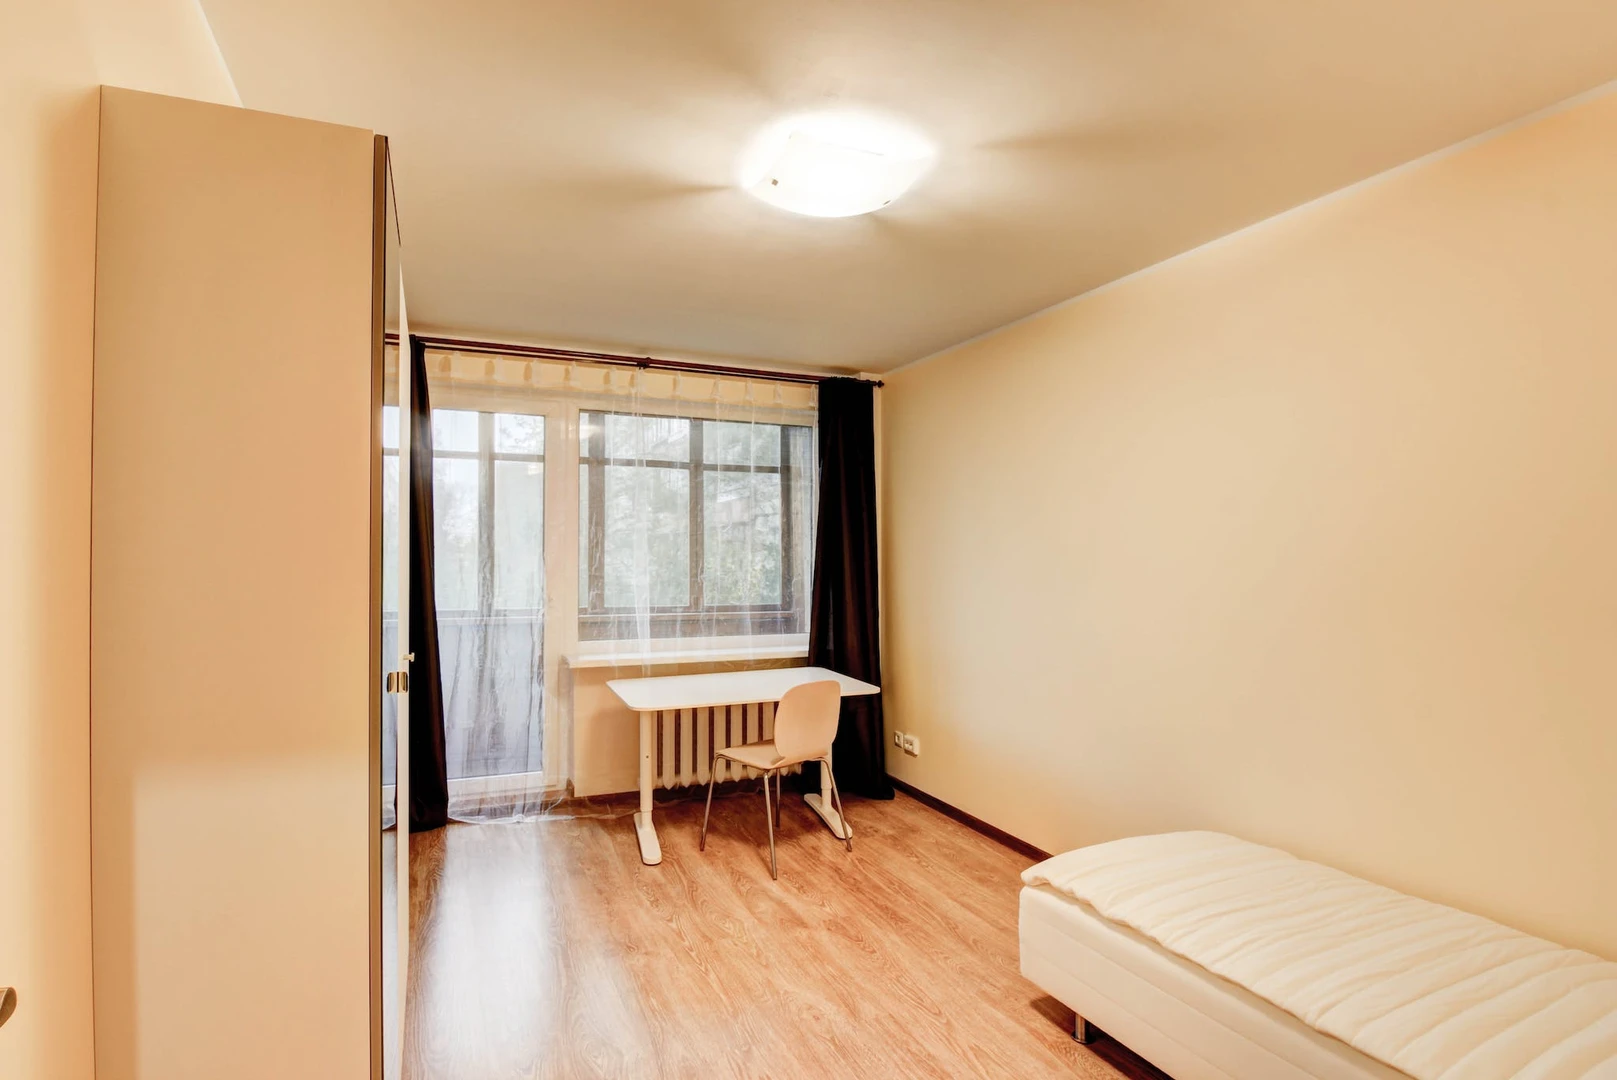 Room for rent in a shared flat in Vilnius